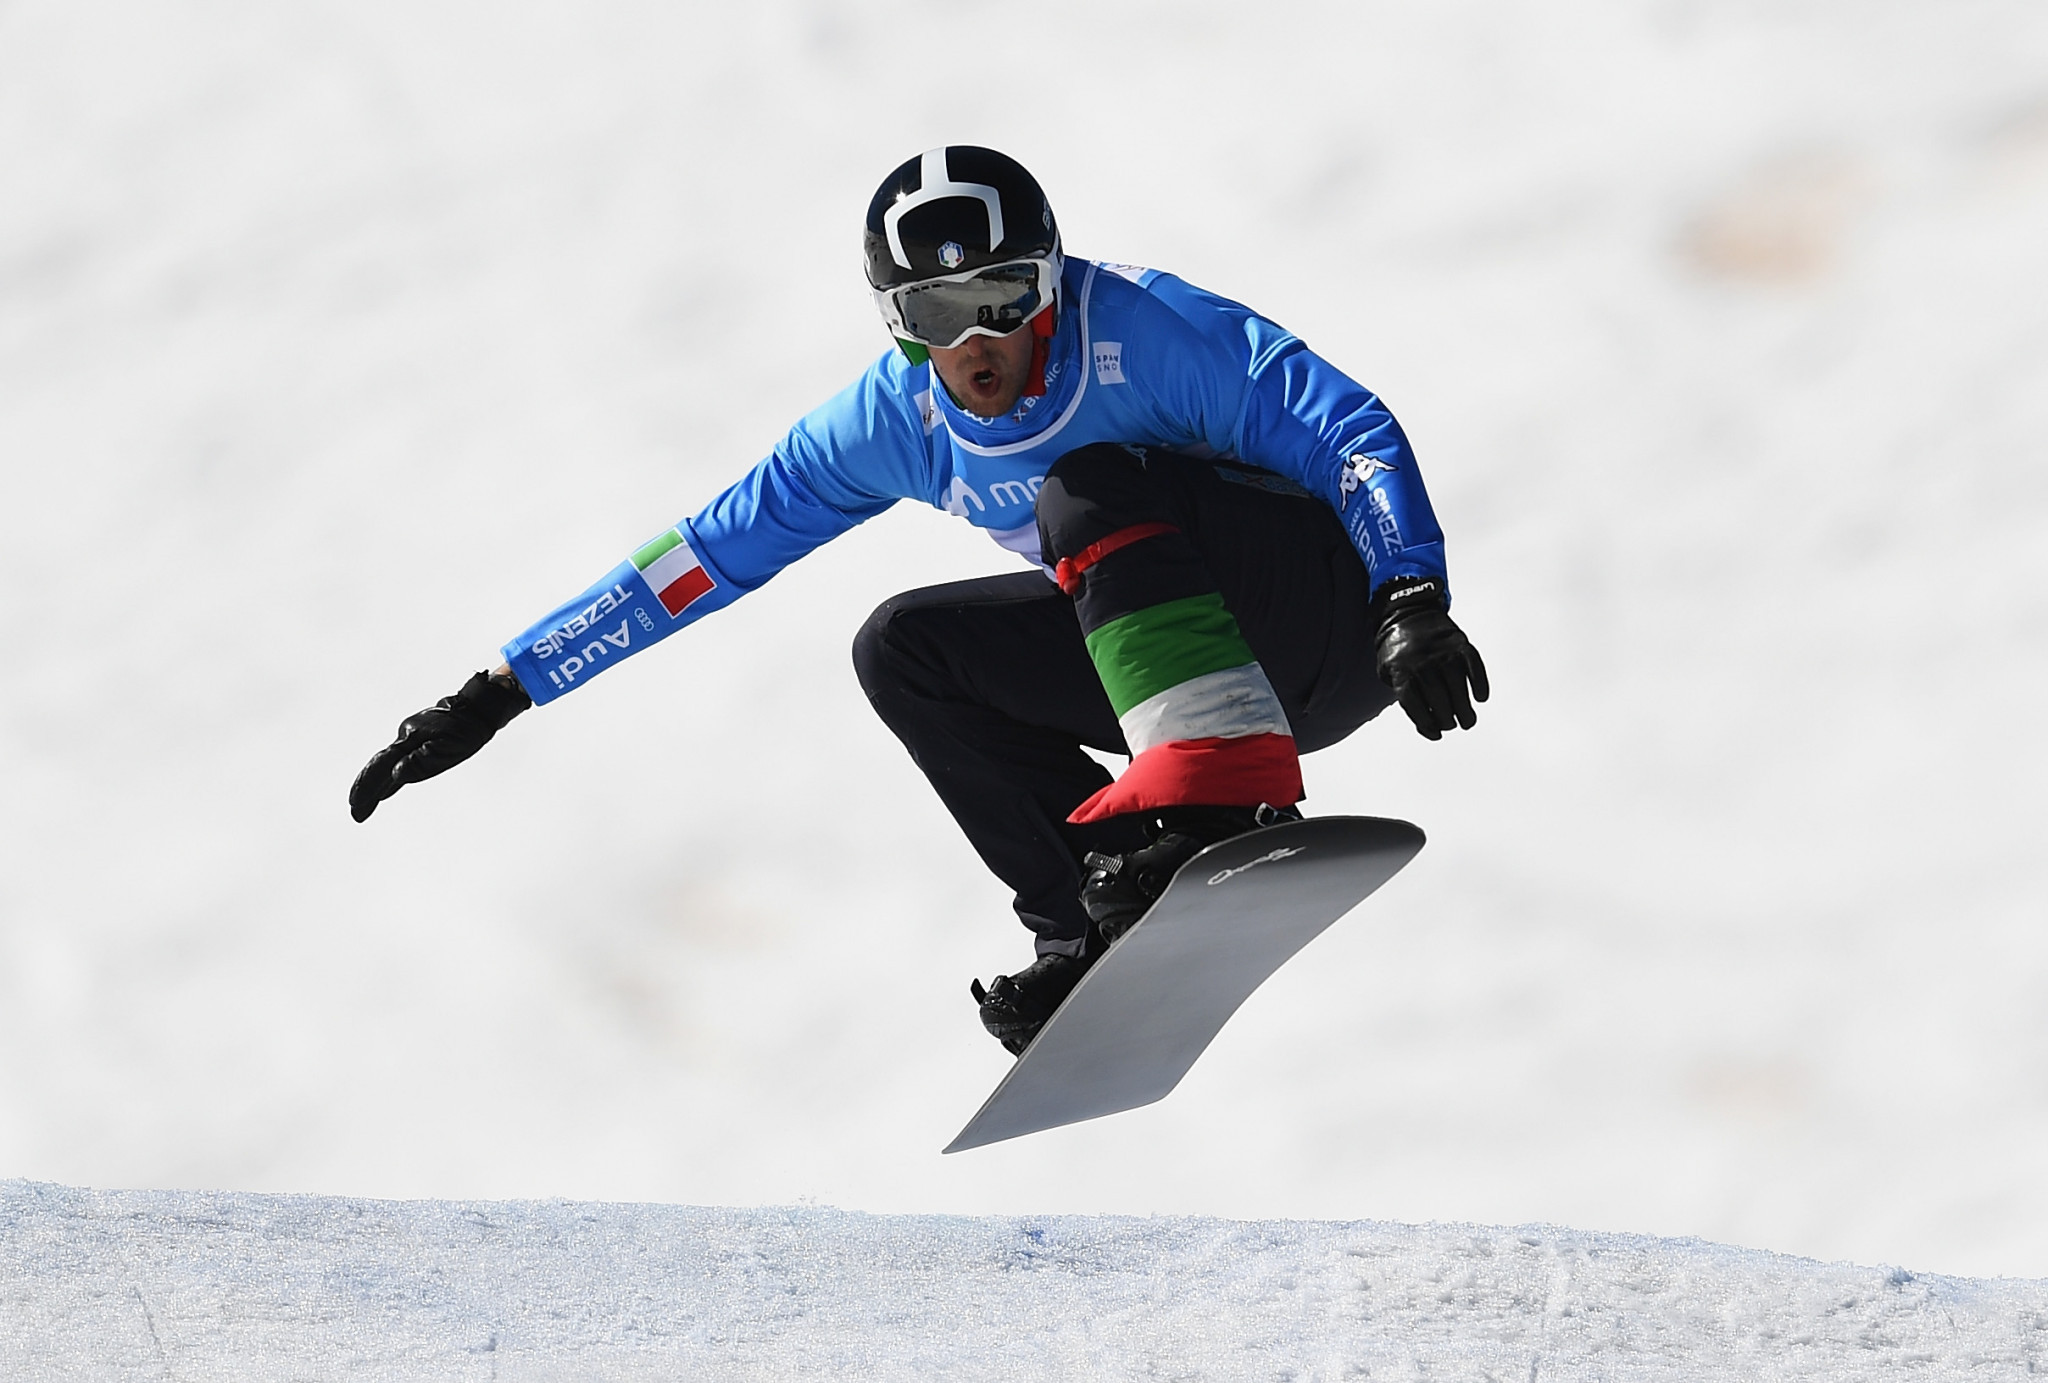 Italy lead qualifying at Snowboard Cross World Cup in Feldberg